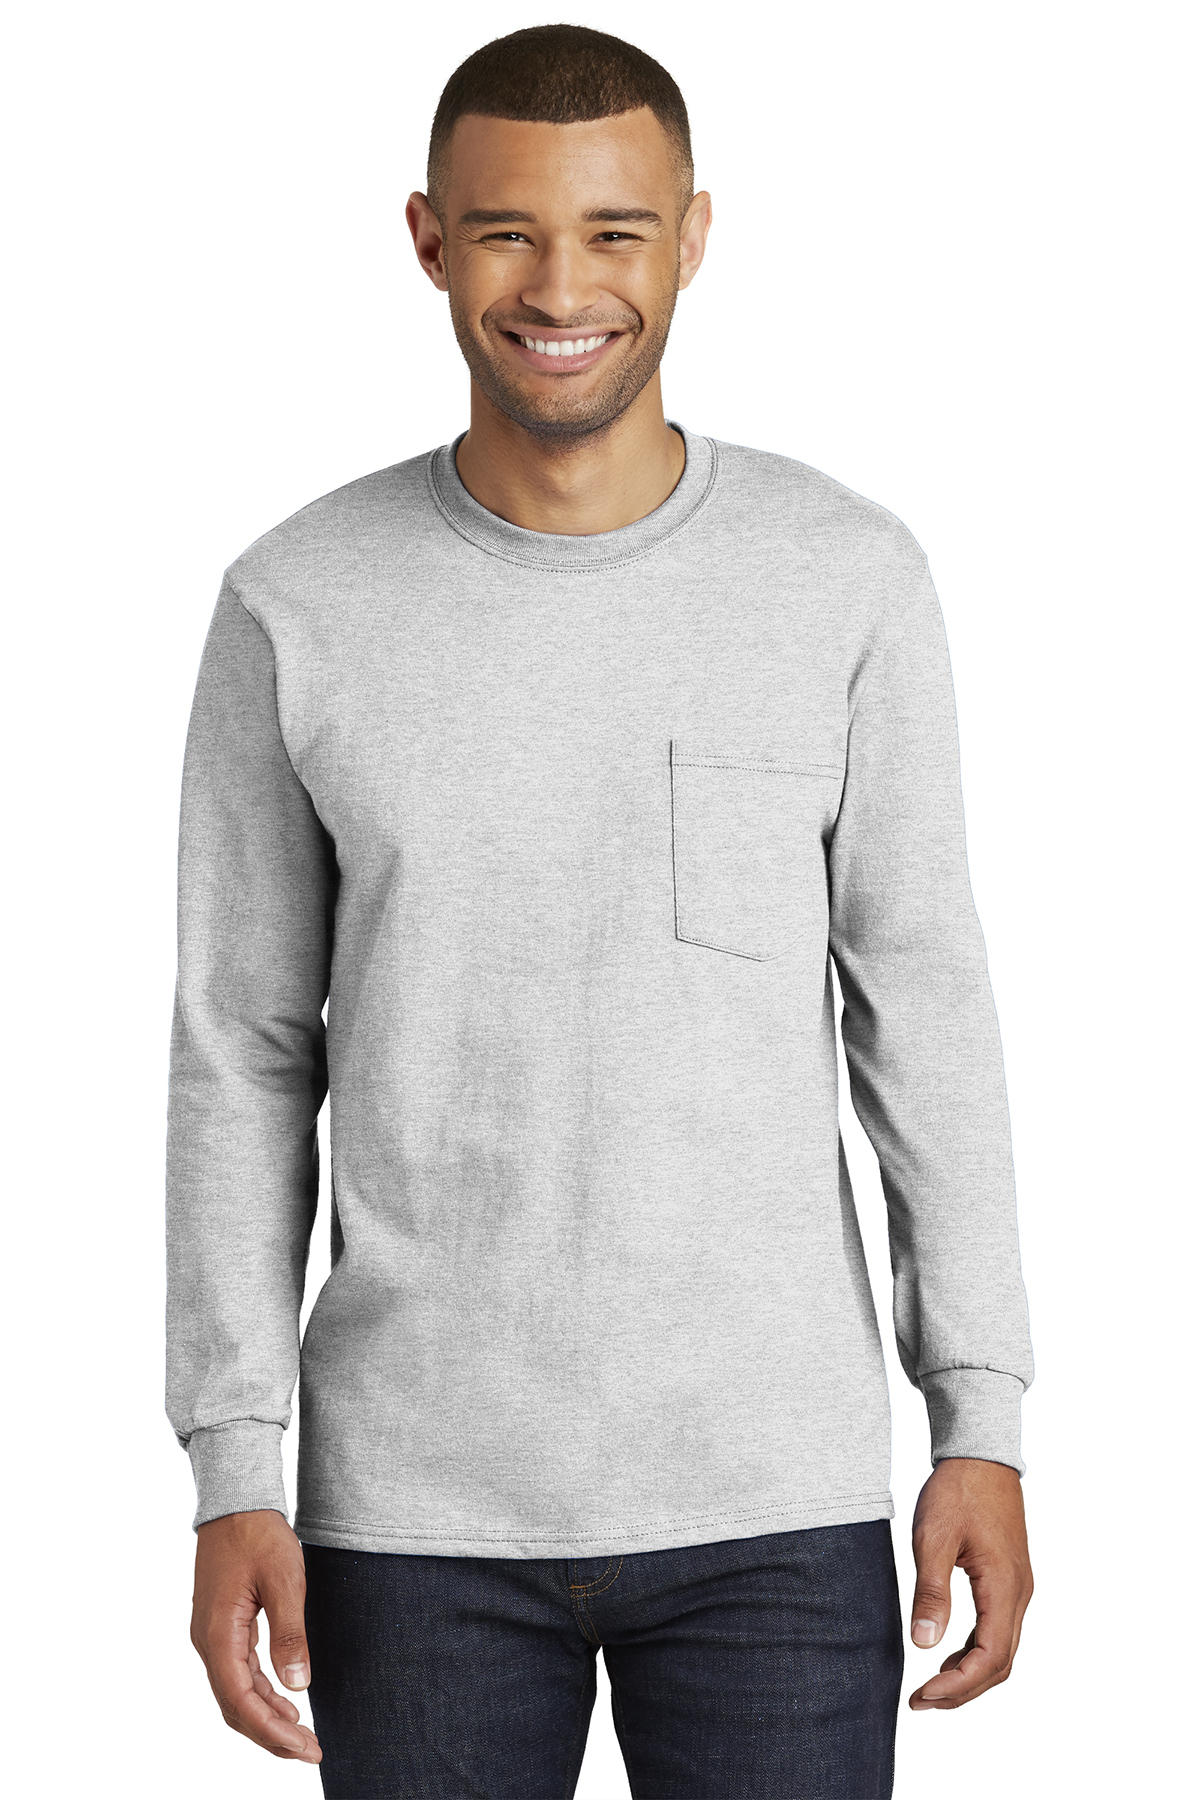 PC61LSP Port & Company Long Sleeve Essential Pocket Tee 